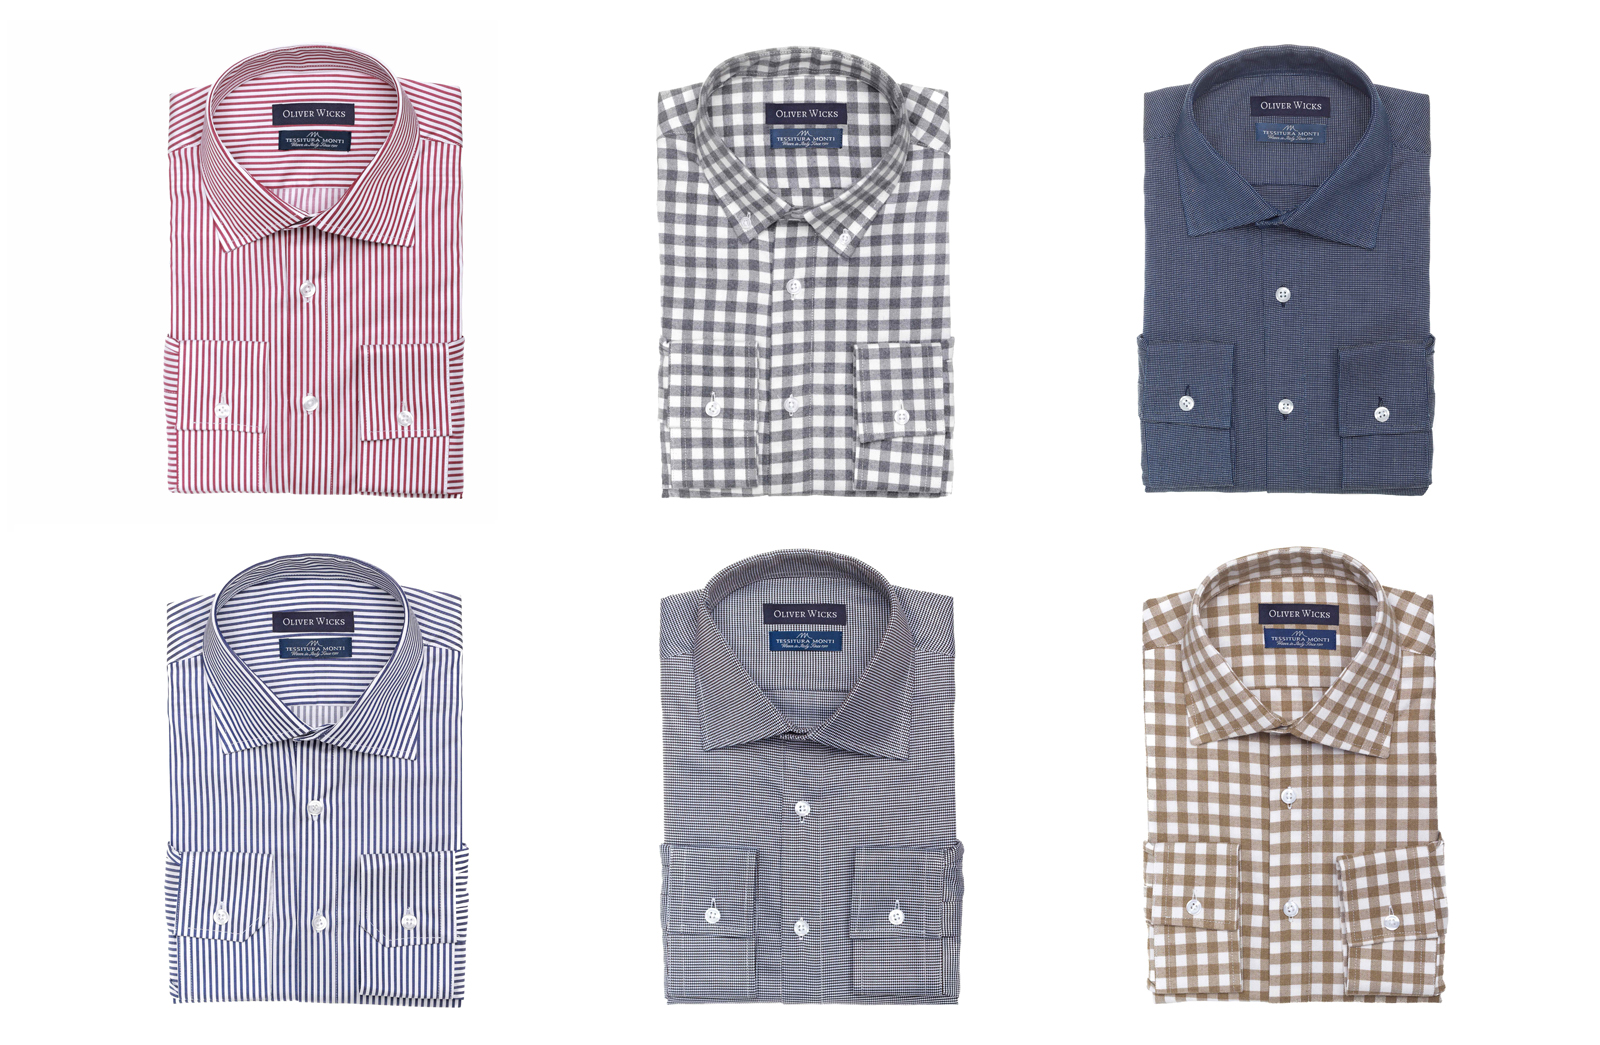 Men's Style Pro x Oliver Wicks Shirt Collaboration